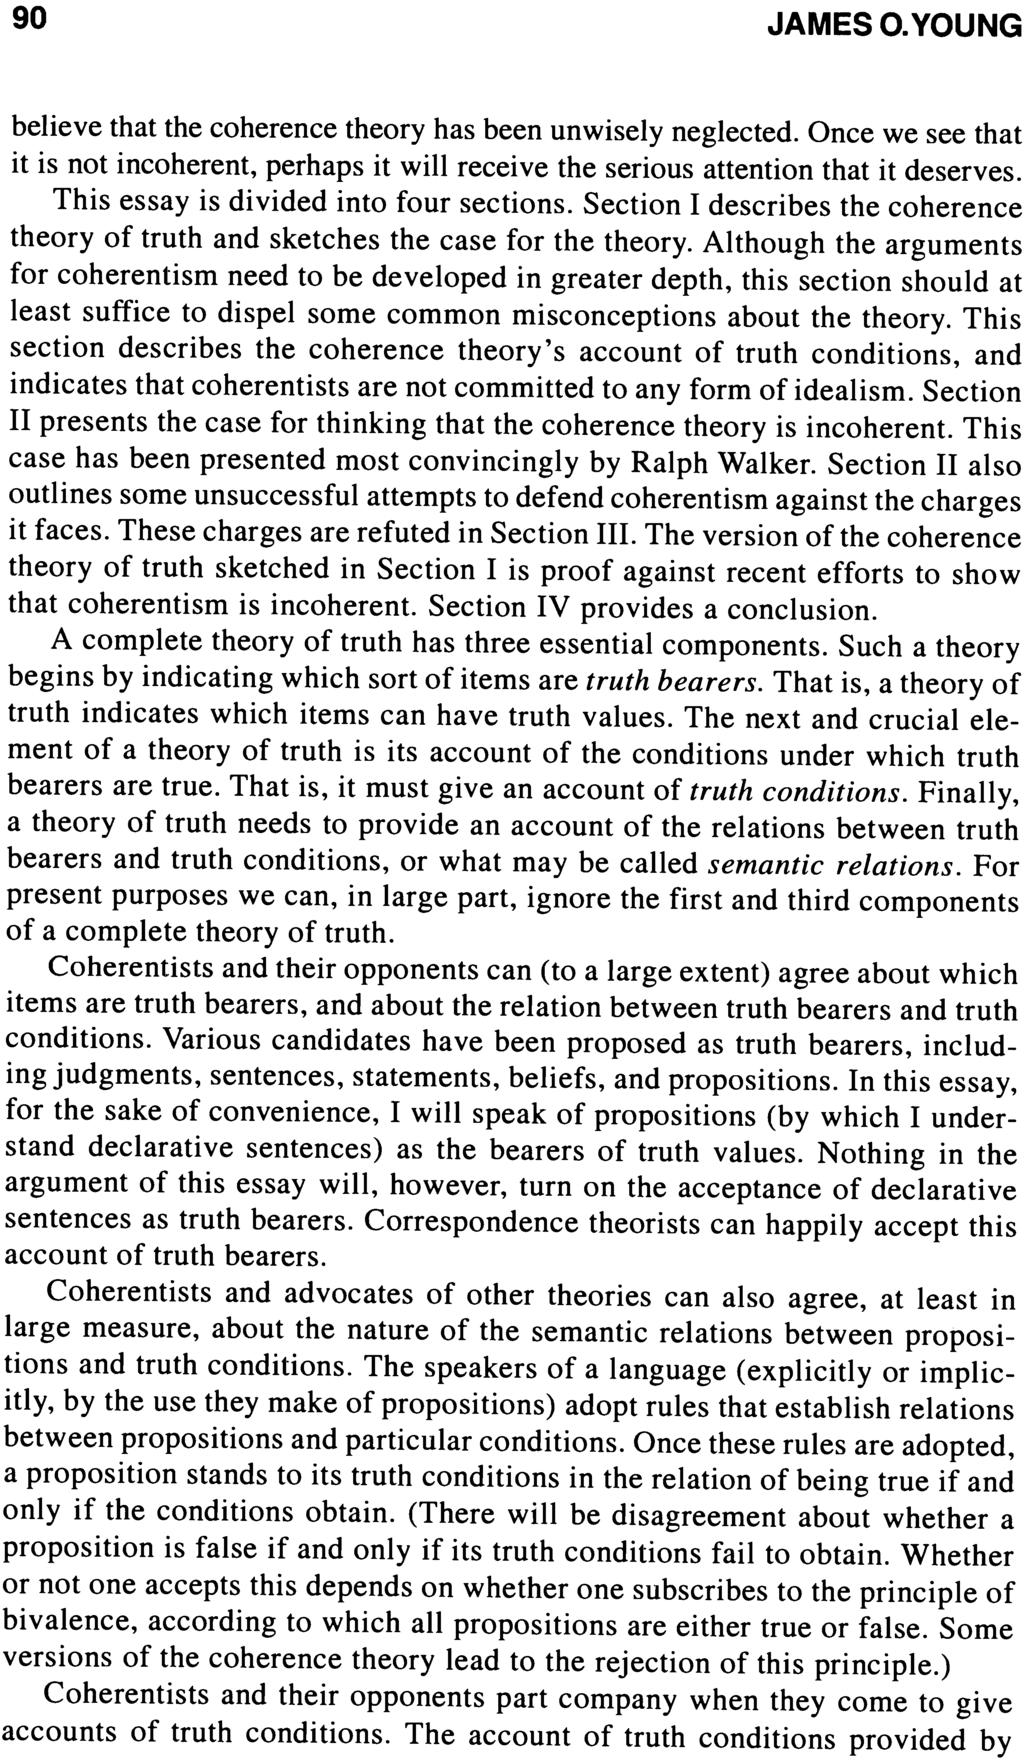 90 JAMES O. YOUNG believe that the coherence theory has been unwisely neglected. Once we see that it is not incoherent, perhaps it will receive the serious attention that it deserves.